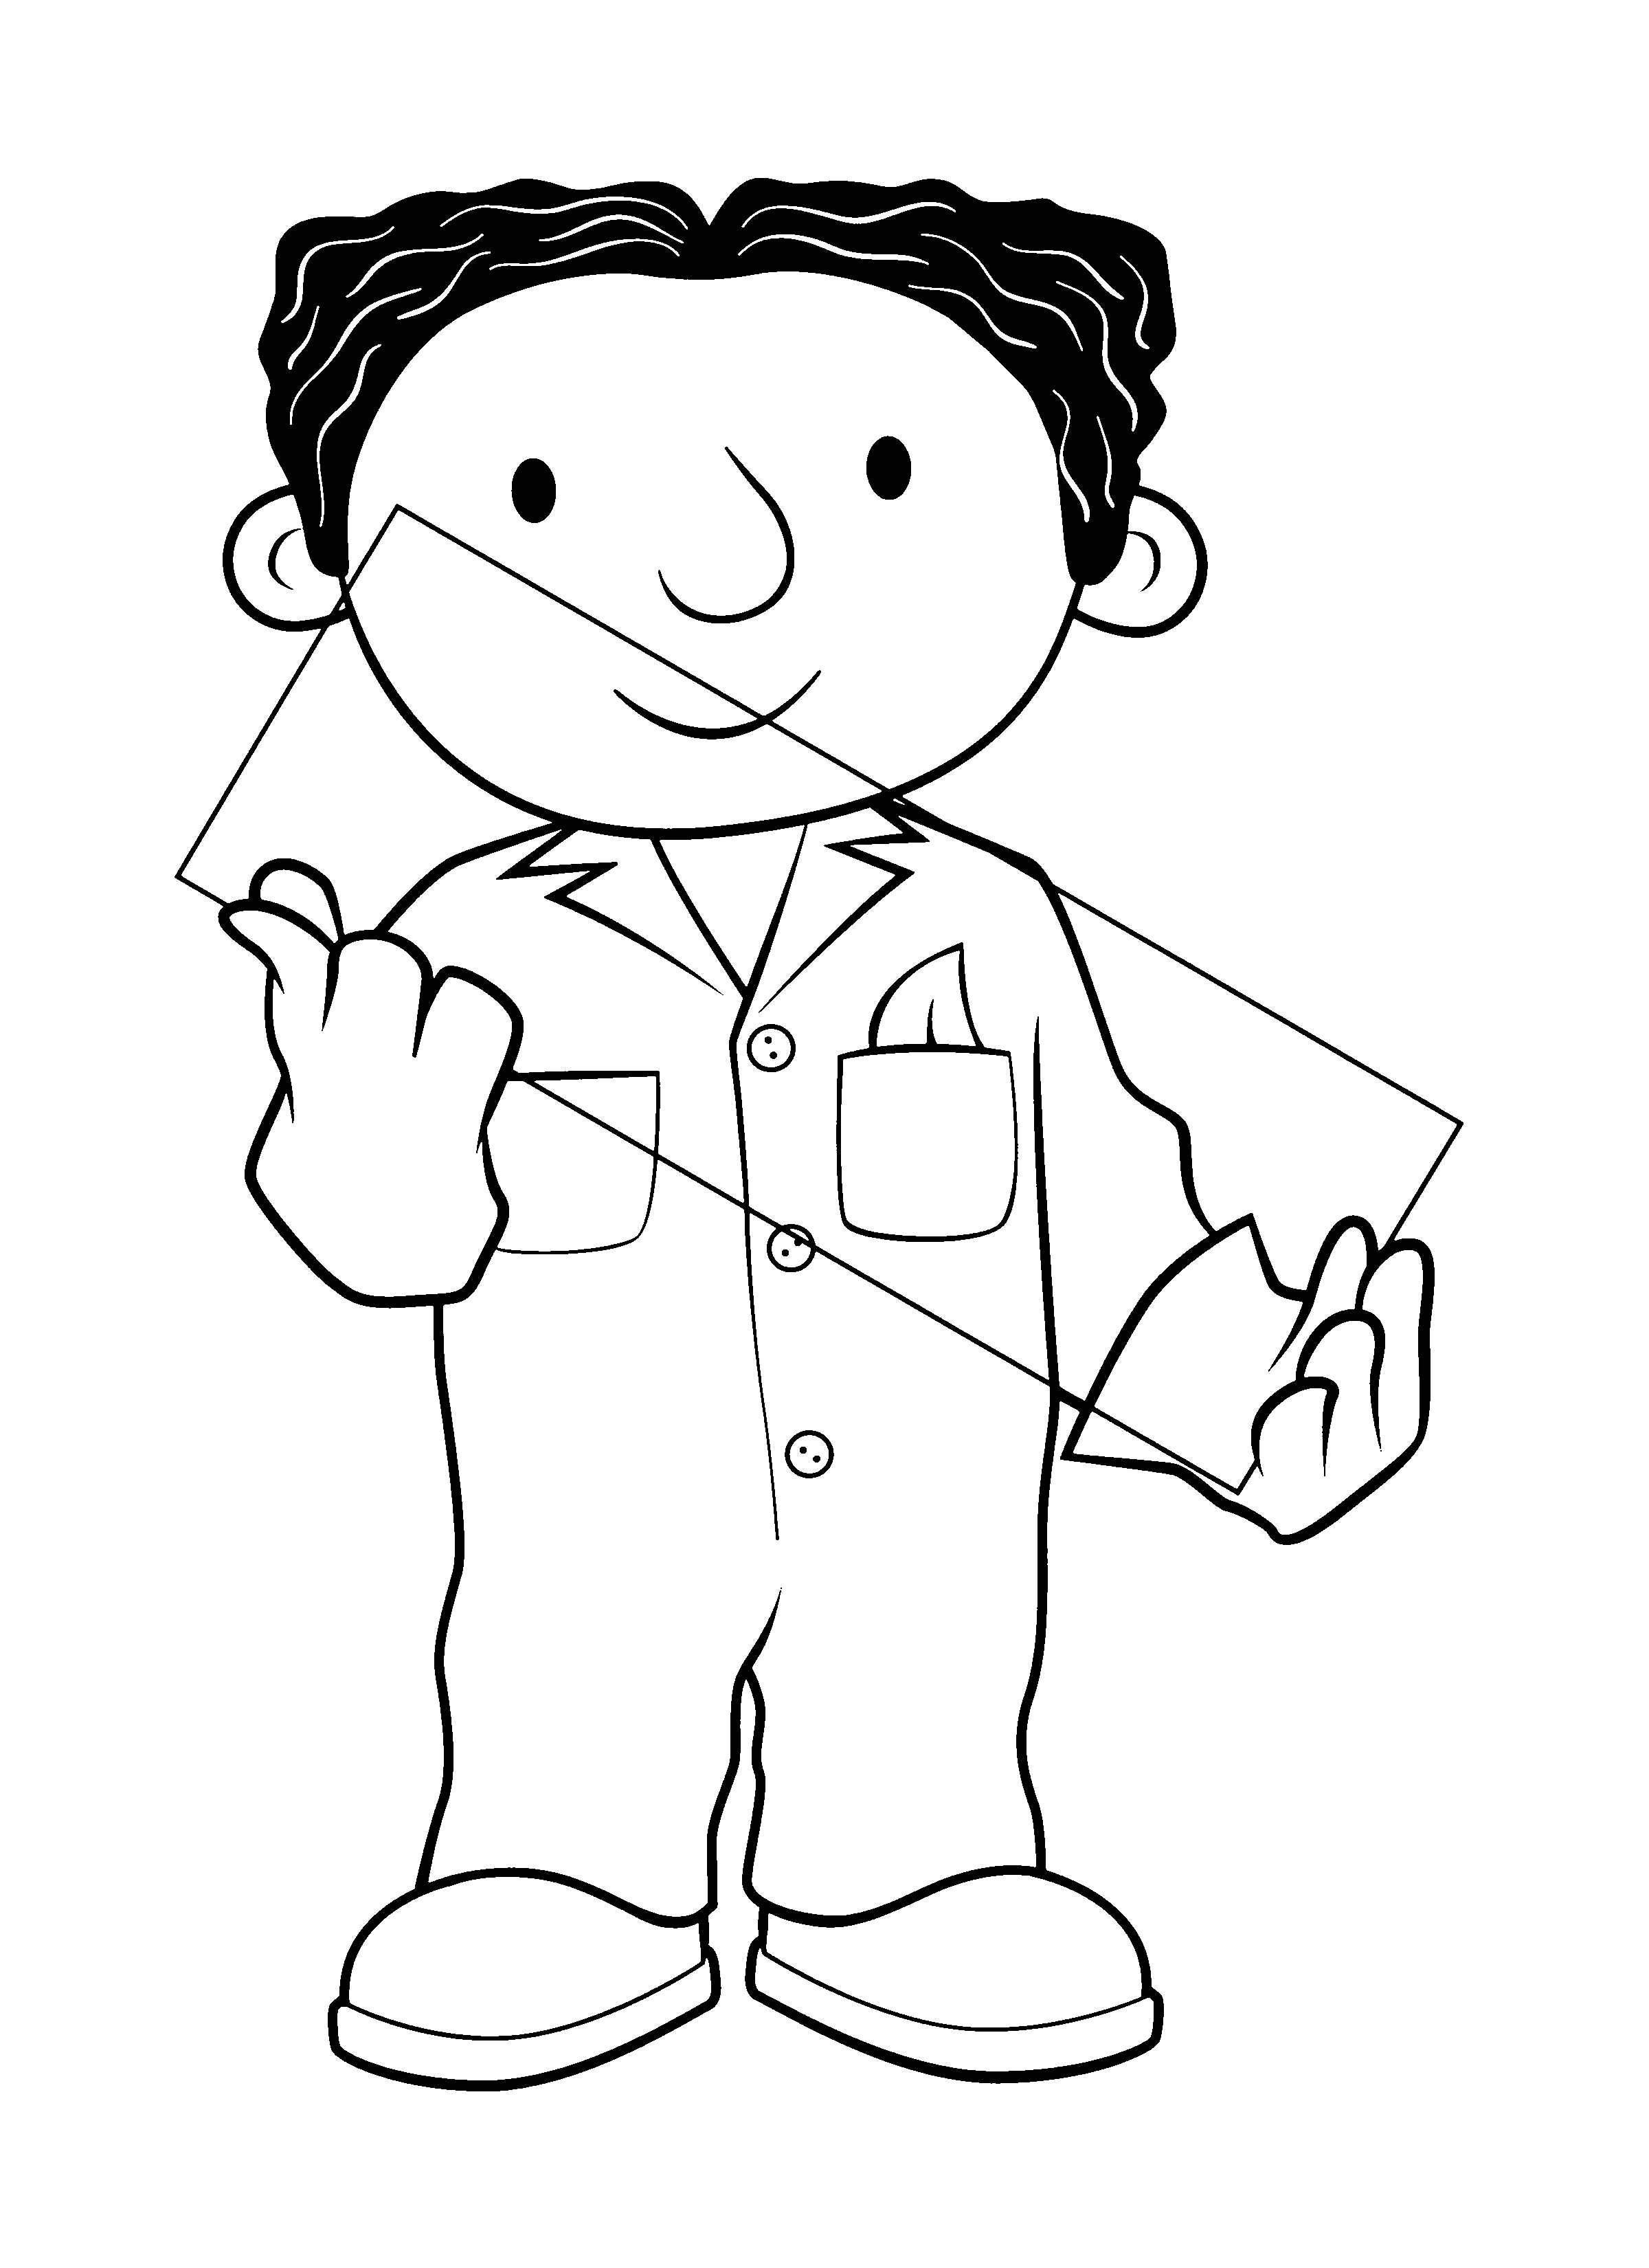 animated-coloring-pages-bob-the-builder-image-0081